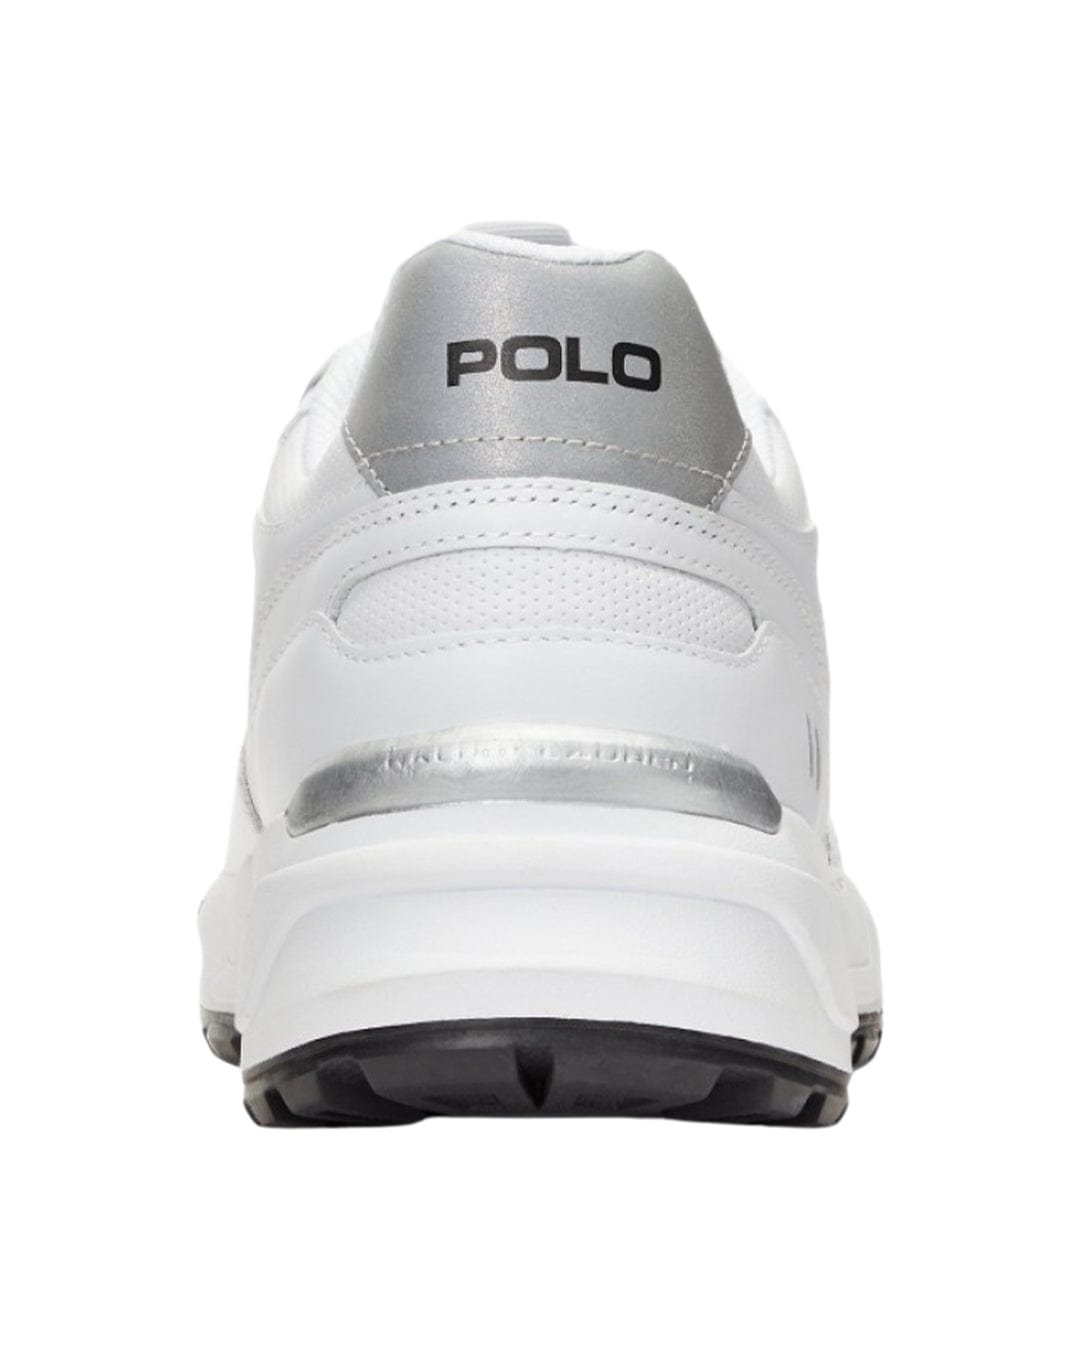 Polo Ralph Lauren Shoes Polo Ralph Lauren Court White Leather Sneakers